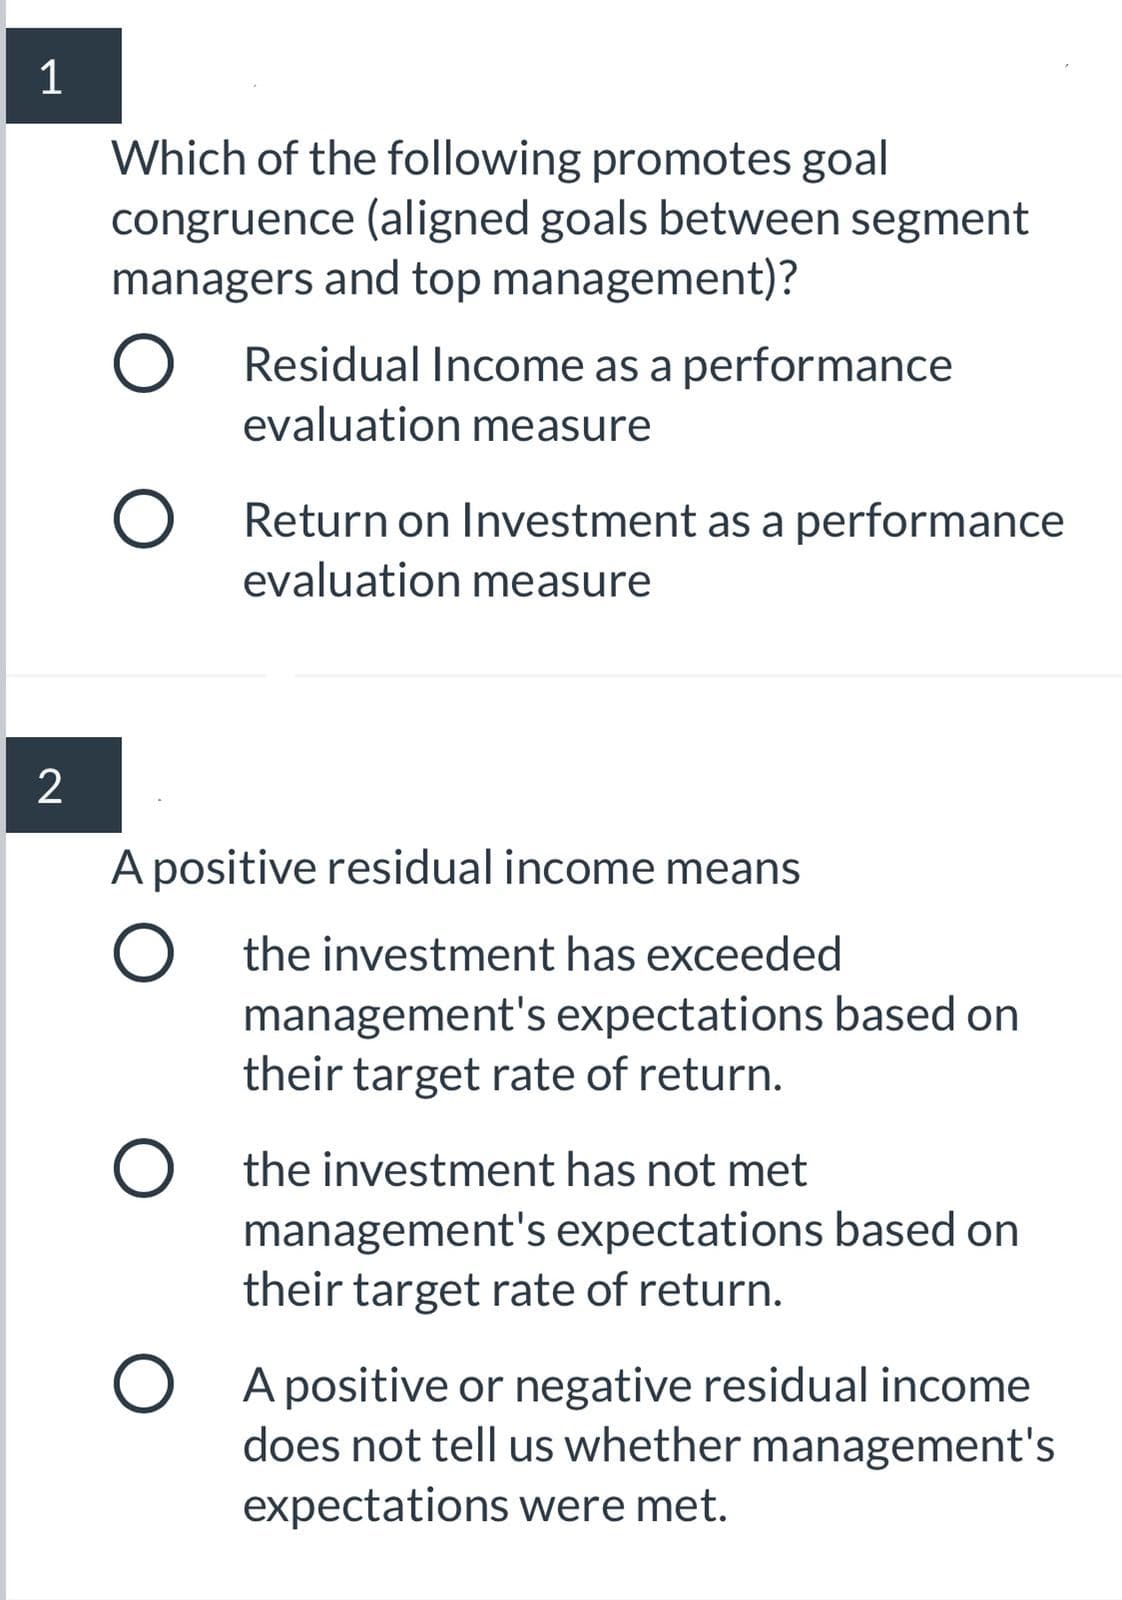 Which of the following promotes goal
congruence (aligned goals between segment
managers and top management)?
Residual Income as a performance
evaluation measure
O Return on Investment as a performance
evaluation measure
A positive residual income means
O the investment has exceeded
management's expectations based on
their target rate of return.
O the investment has not met
management's expectations based on
their target rate of return.
O A positive or negative residual income
does not tell us whether management's
expectations were met.
